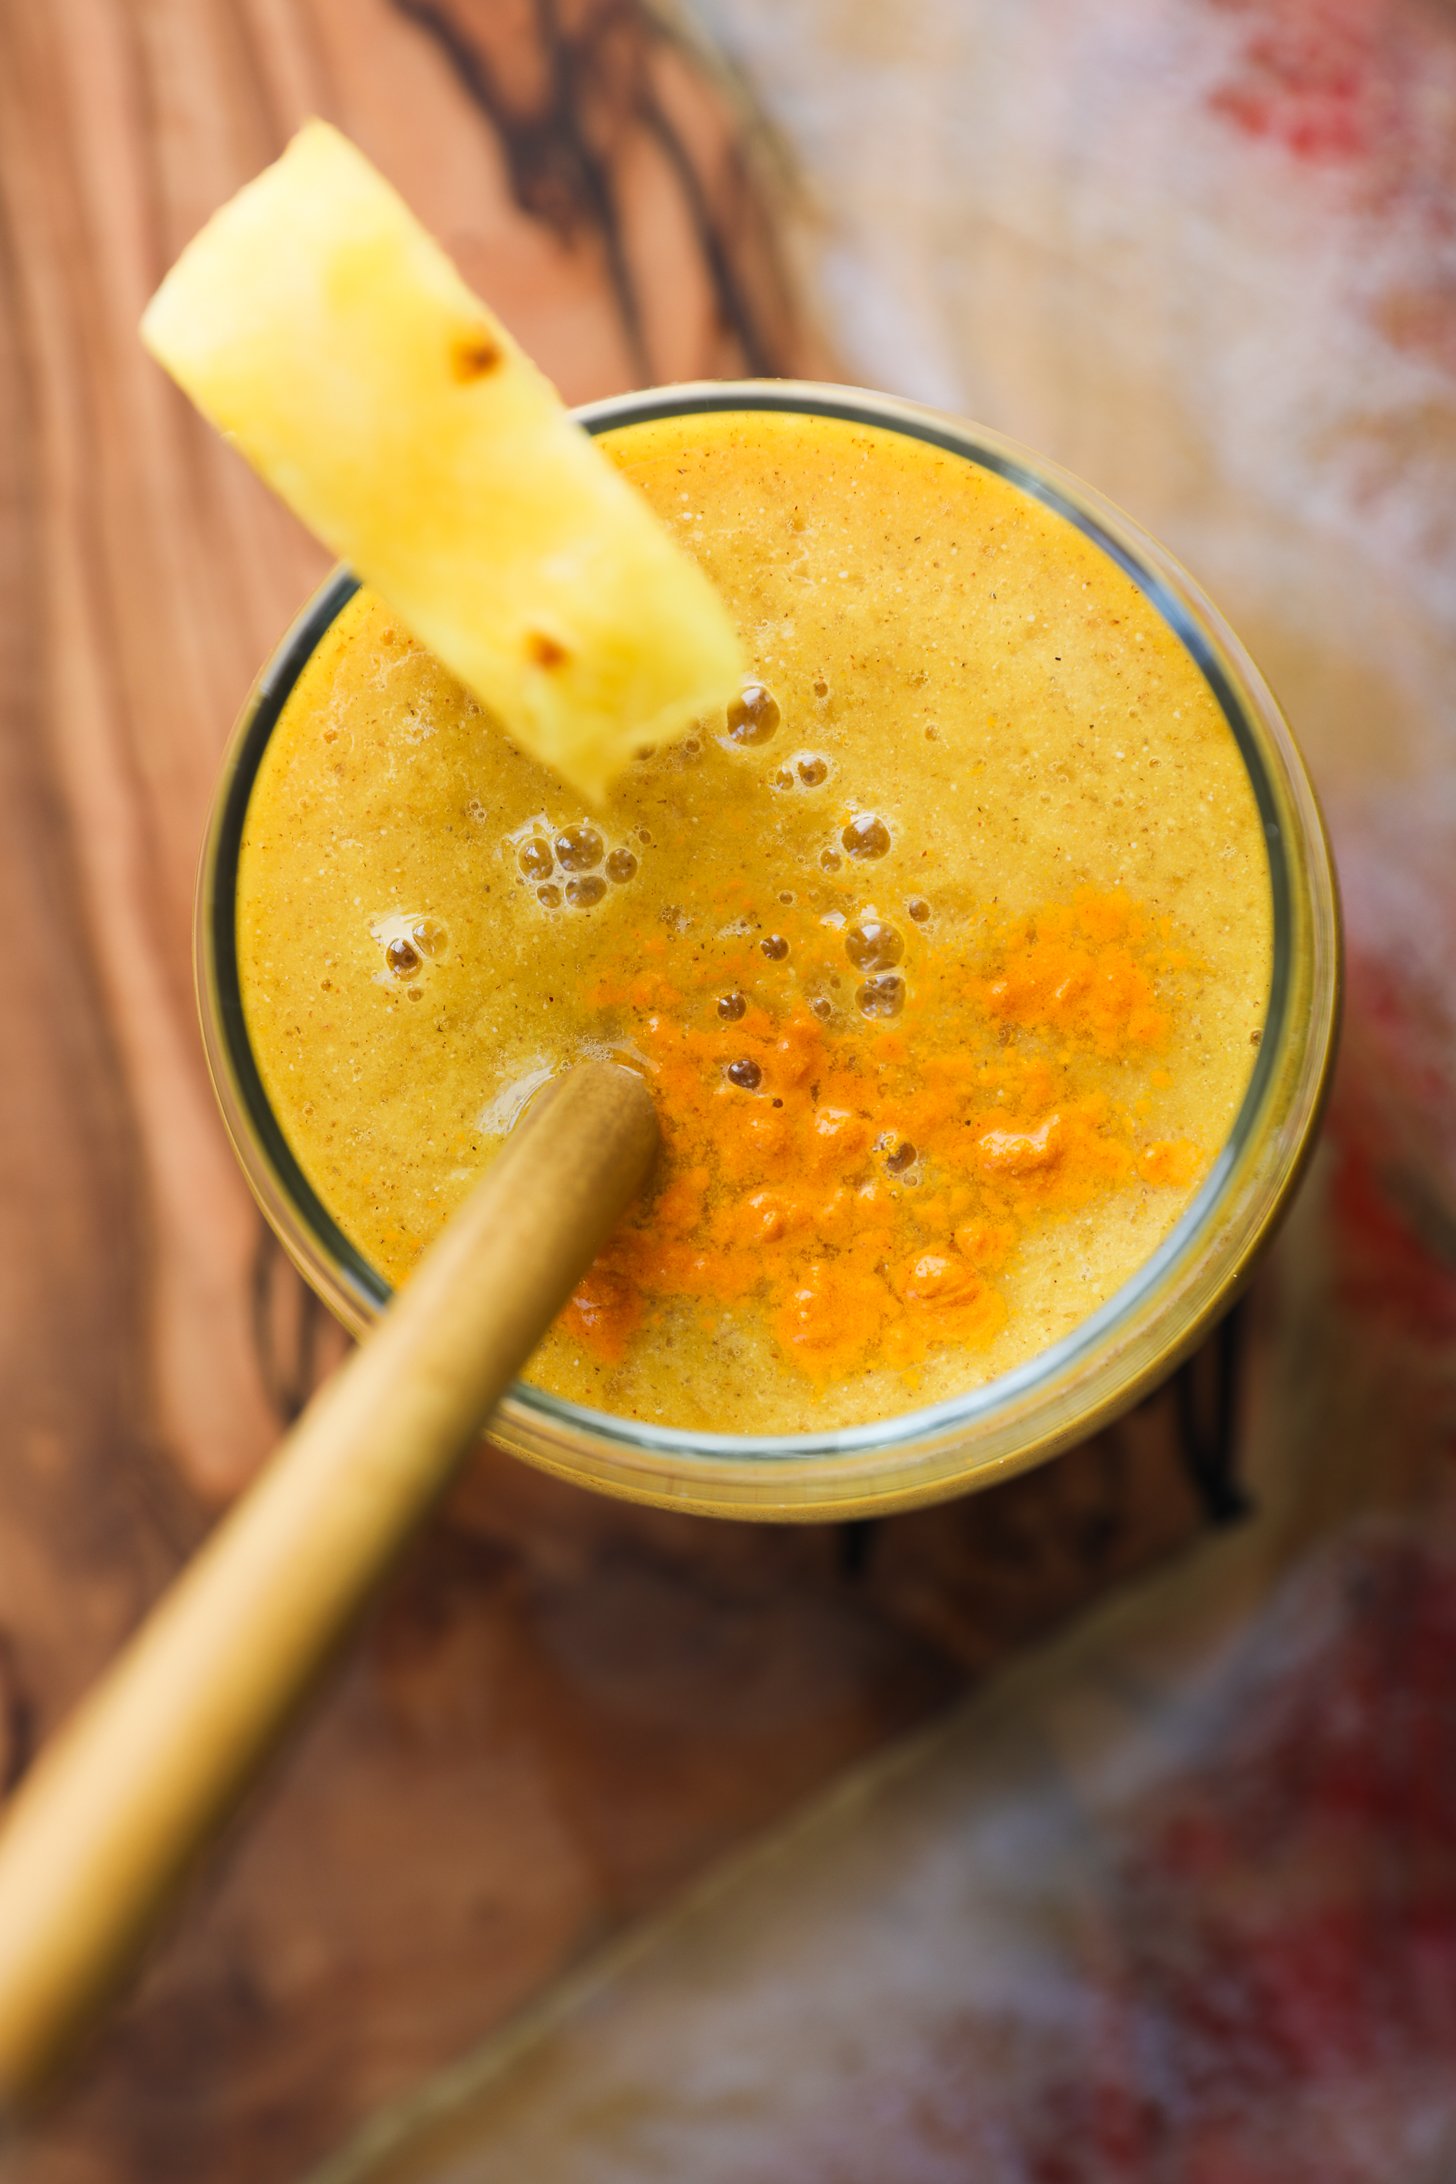 Top view of a yellow smoothie sprinkled with turmeric powder, garnished with a pineapple wedge on the rim, and a wooden straw nestled inside.